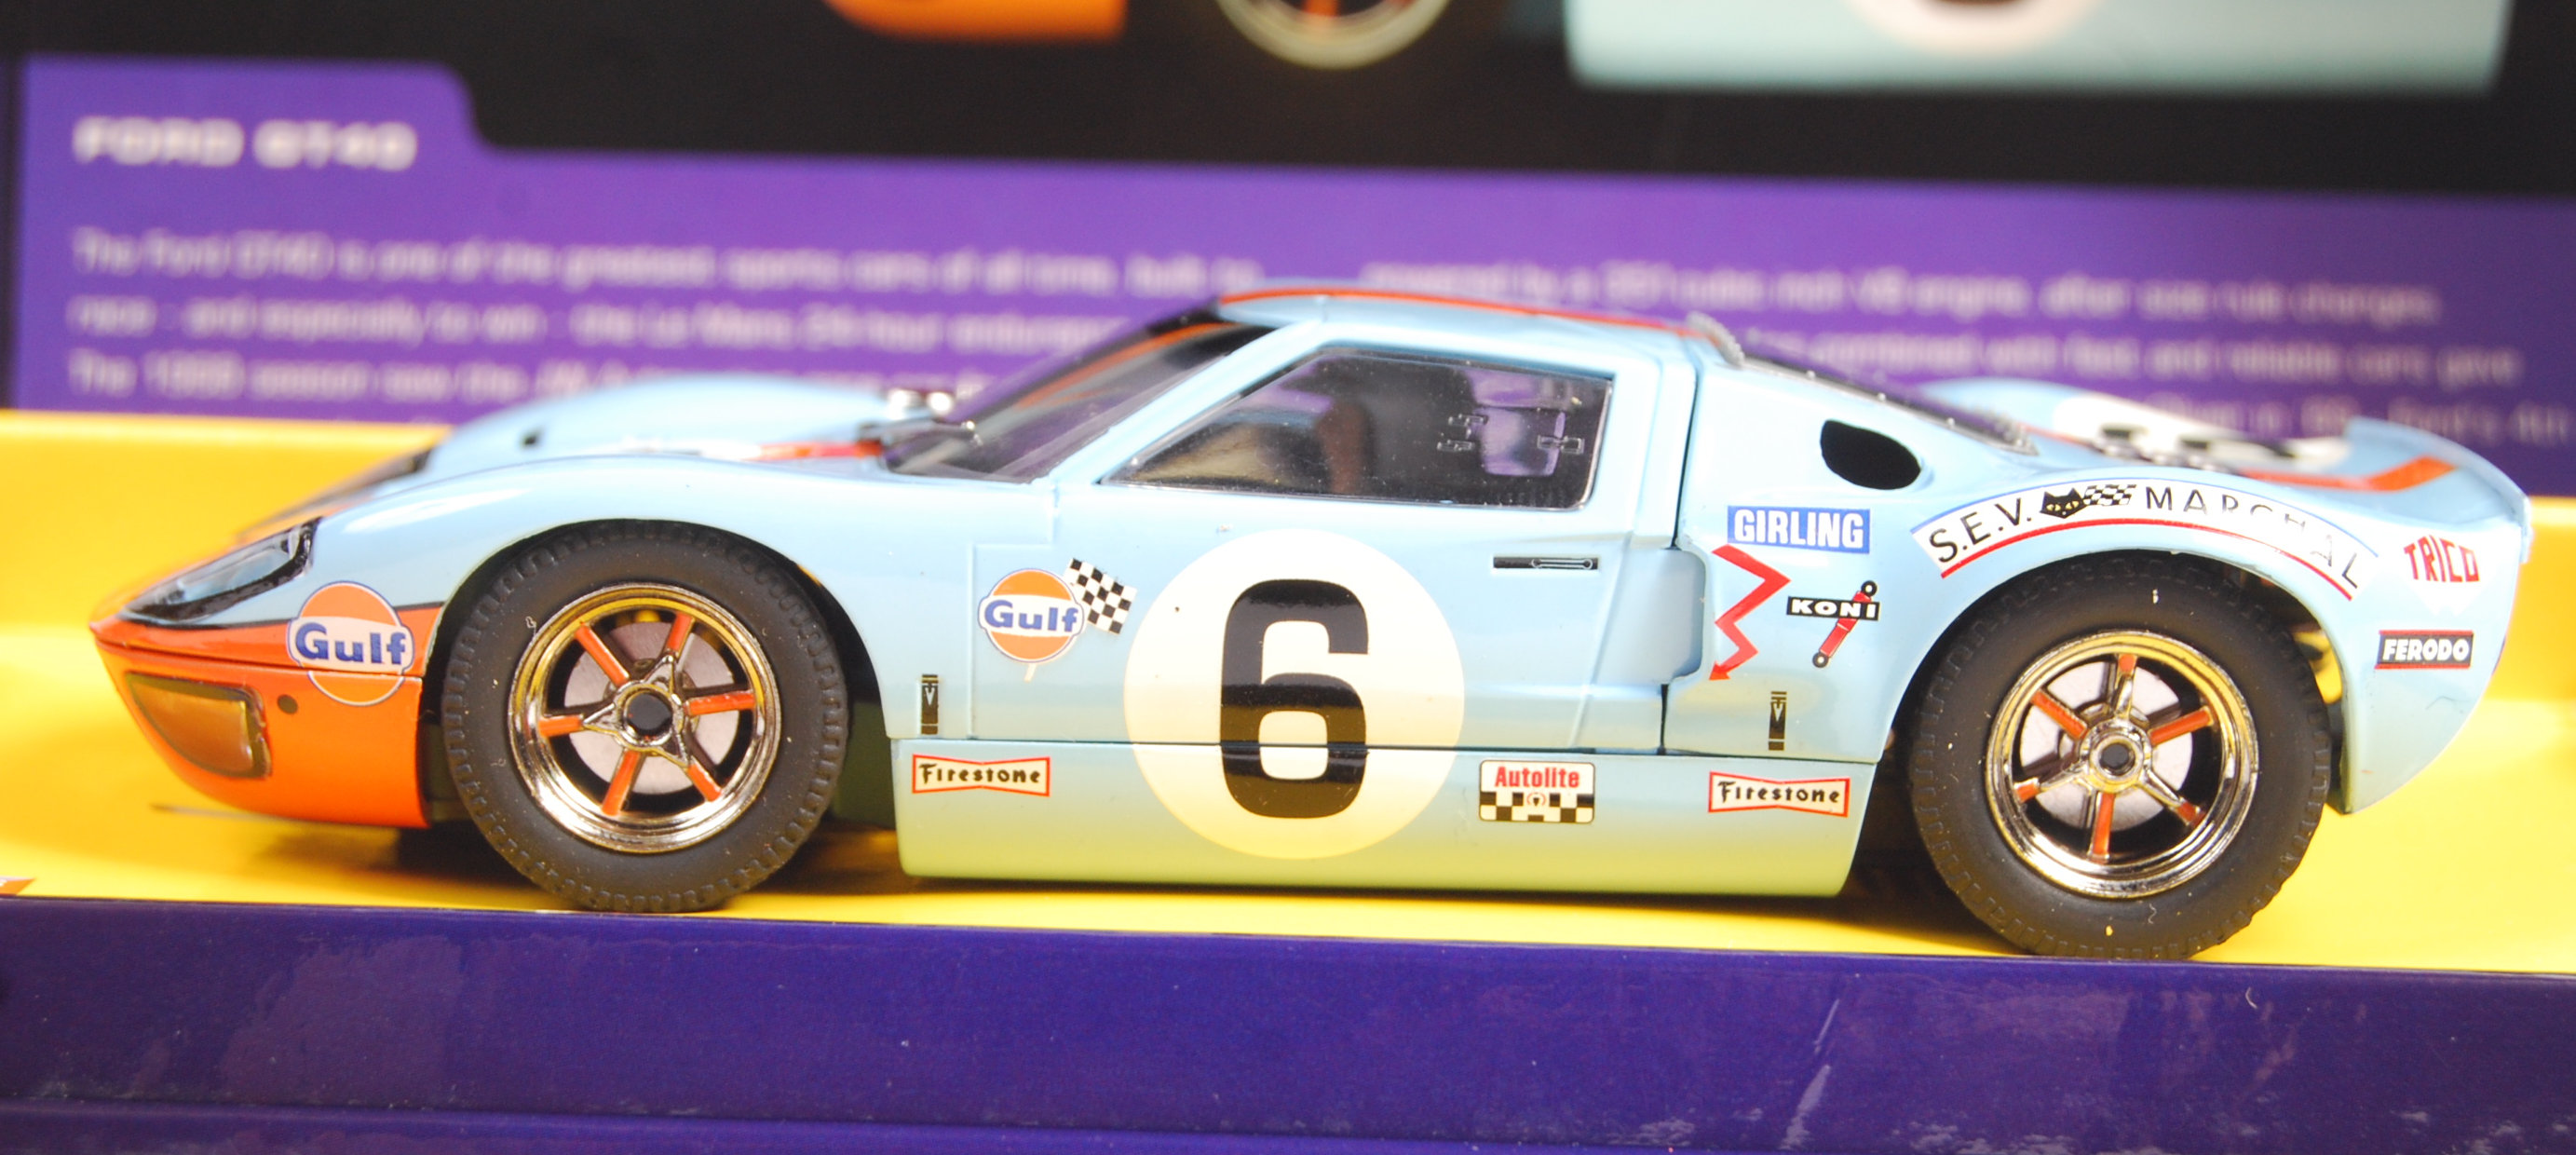 SCALEXTRIC SPORT LIMITED EDITION 1/32 SCALE SLOT RACING CAR - Image 2 of 5